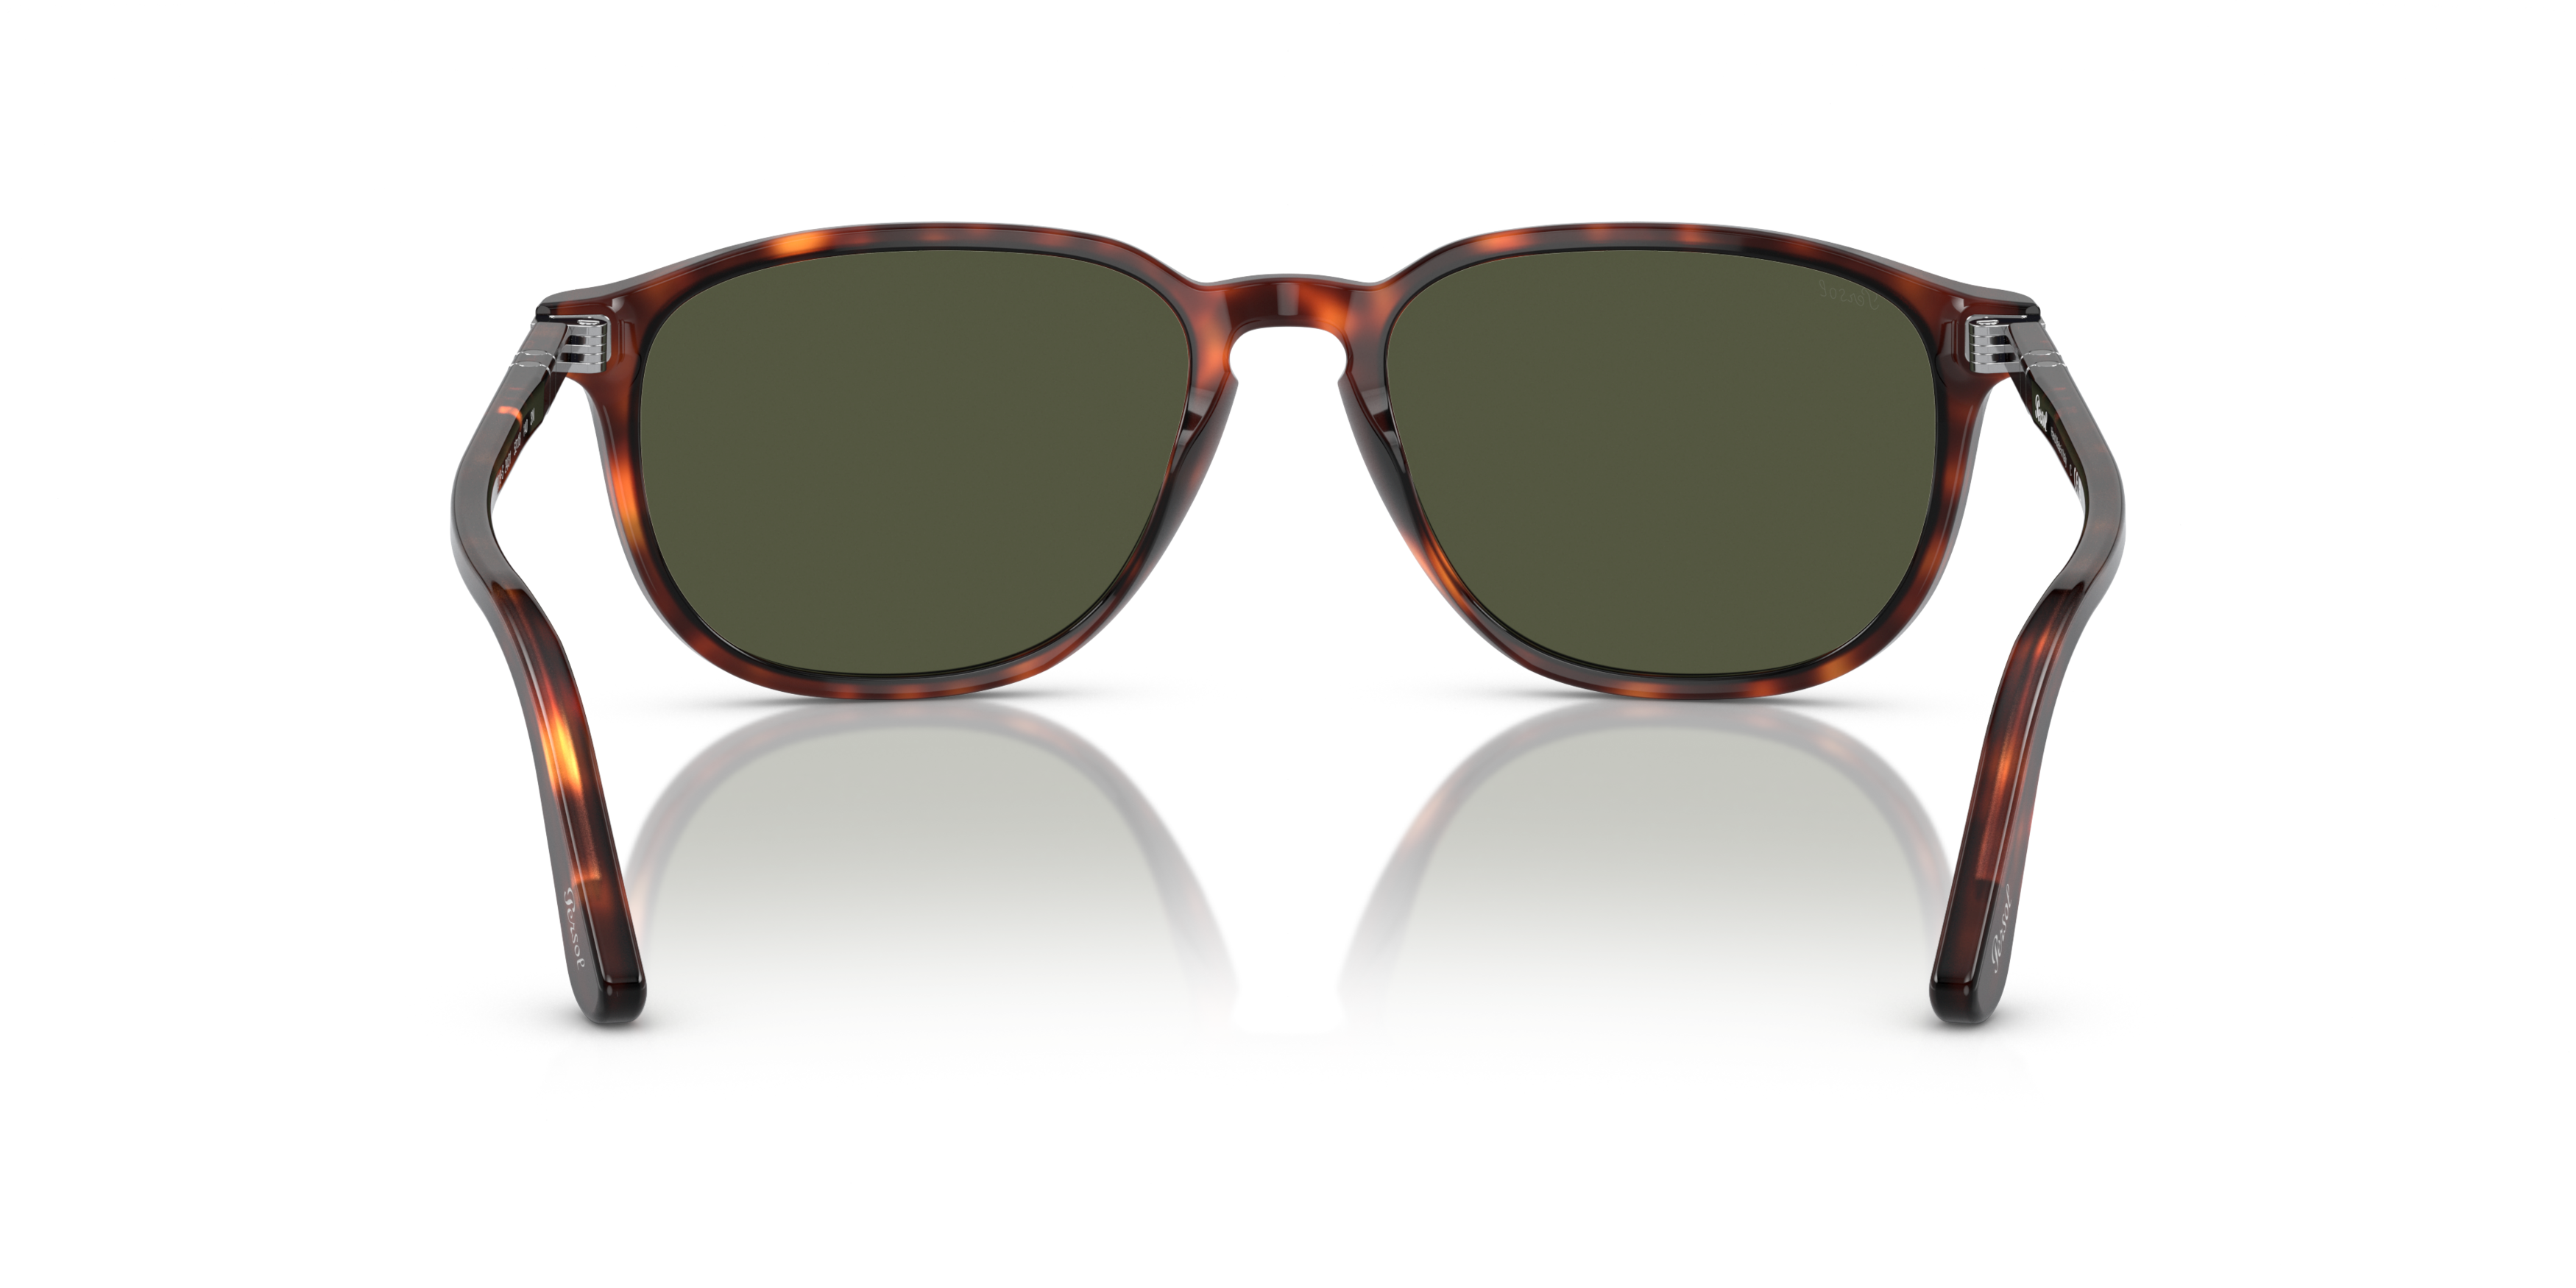 [products.image.detail02] PERSOL PO3019S 24/31